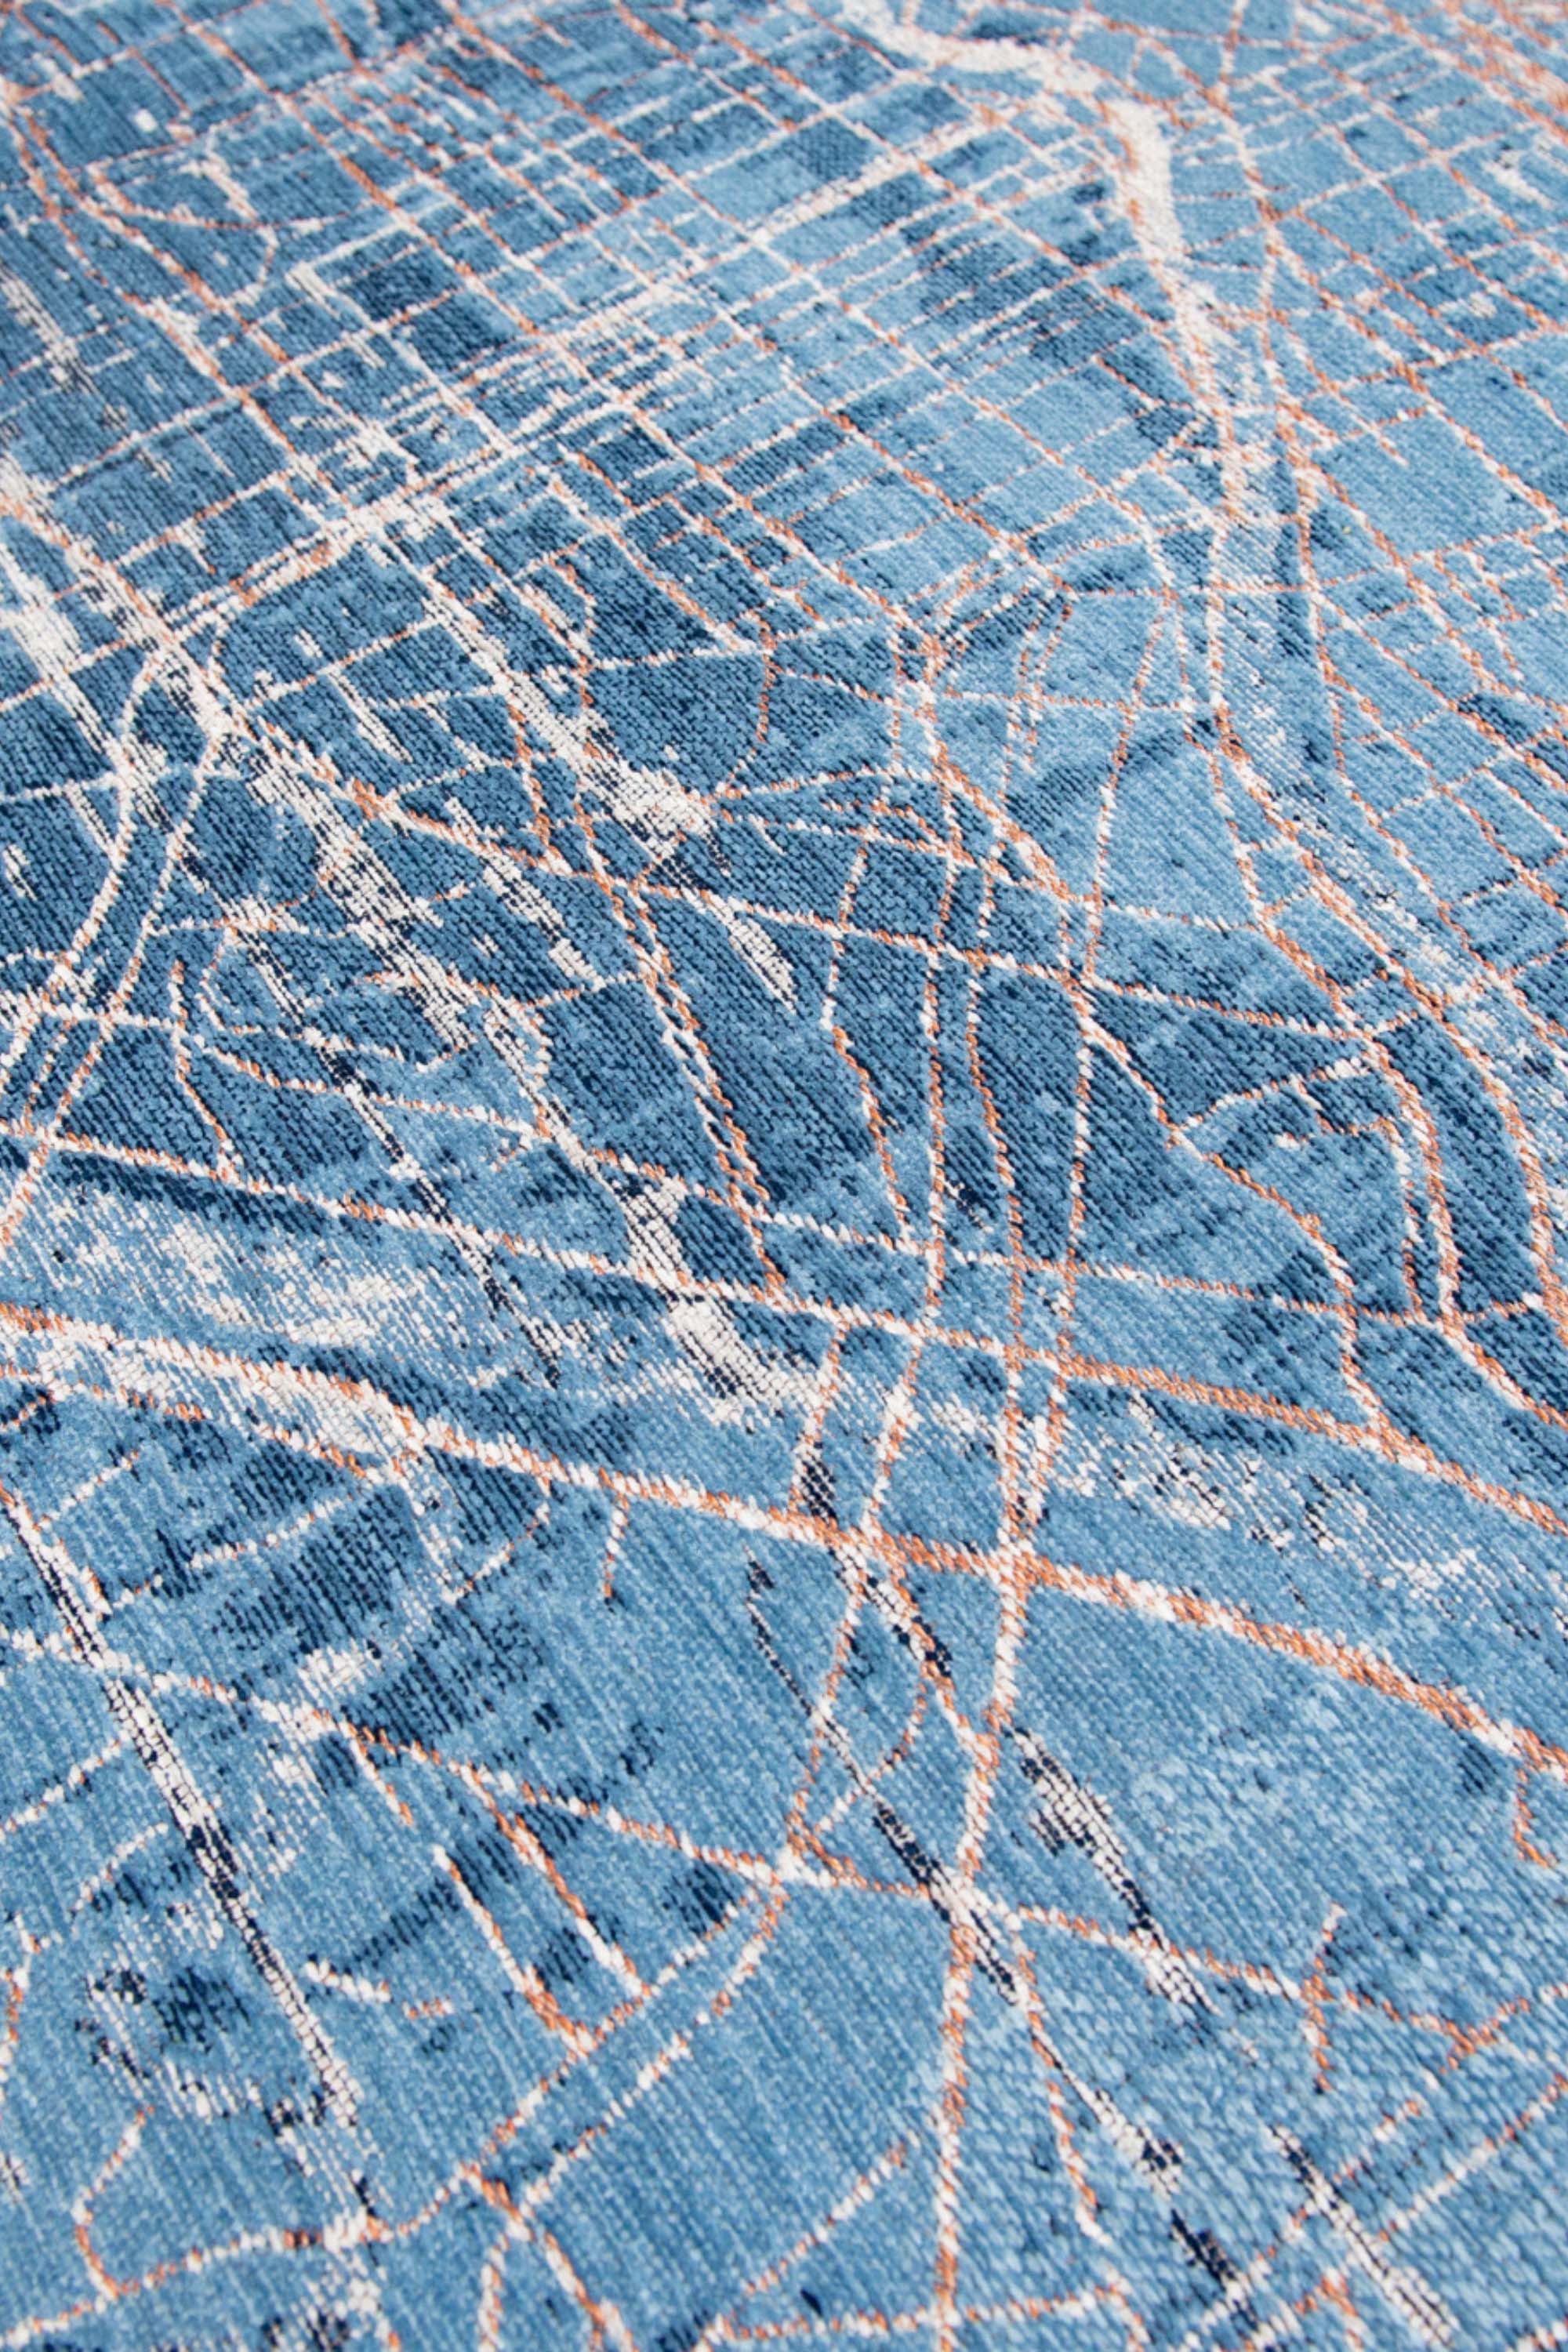 Blue abstract rug with a pattern inspired by the map of Tokyo